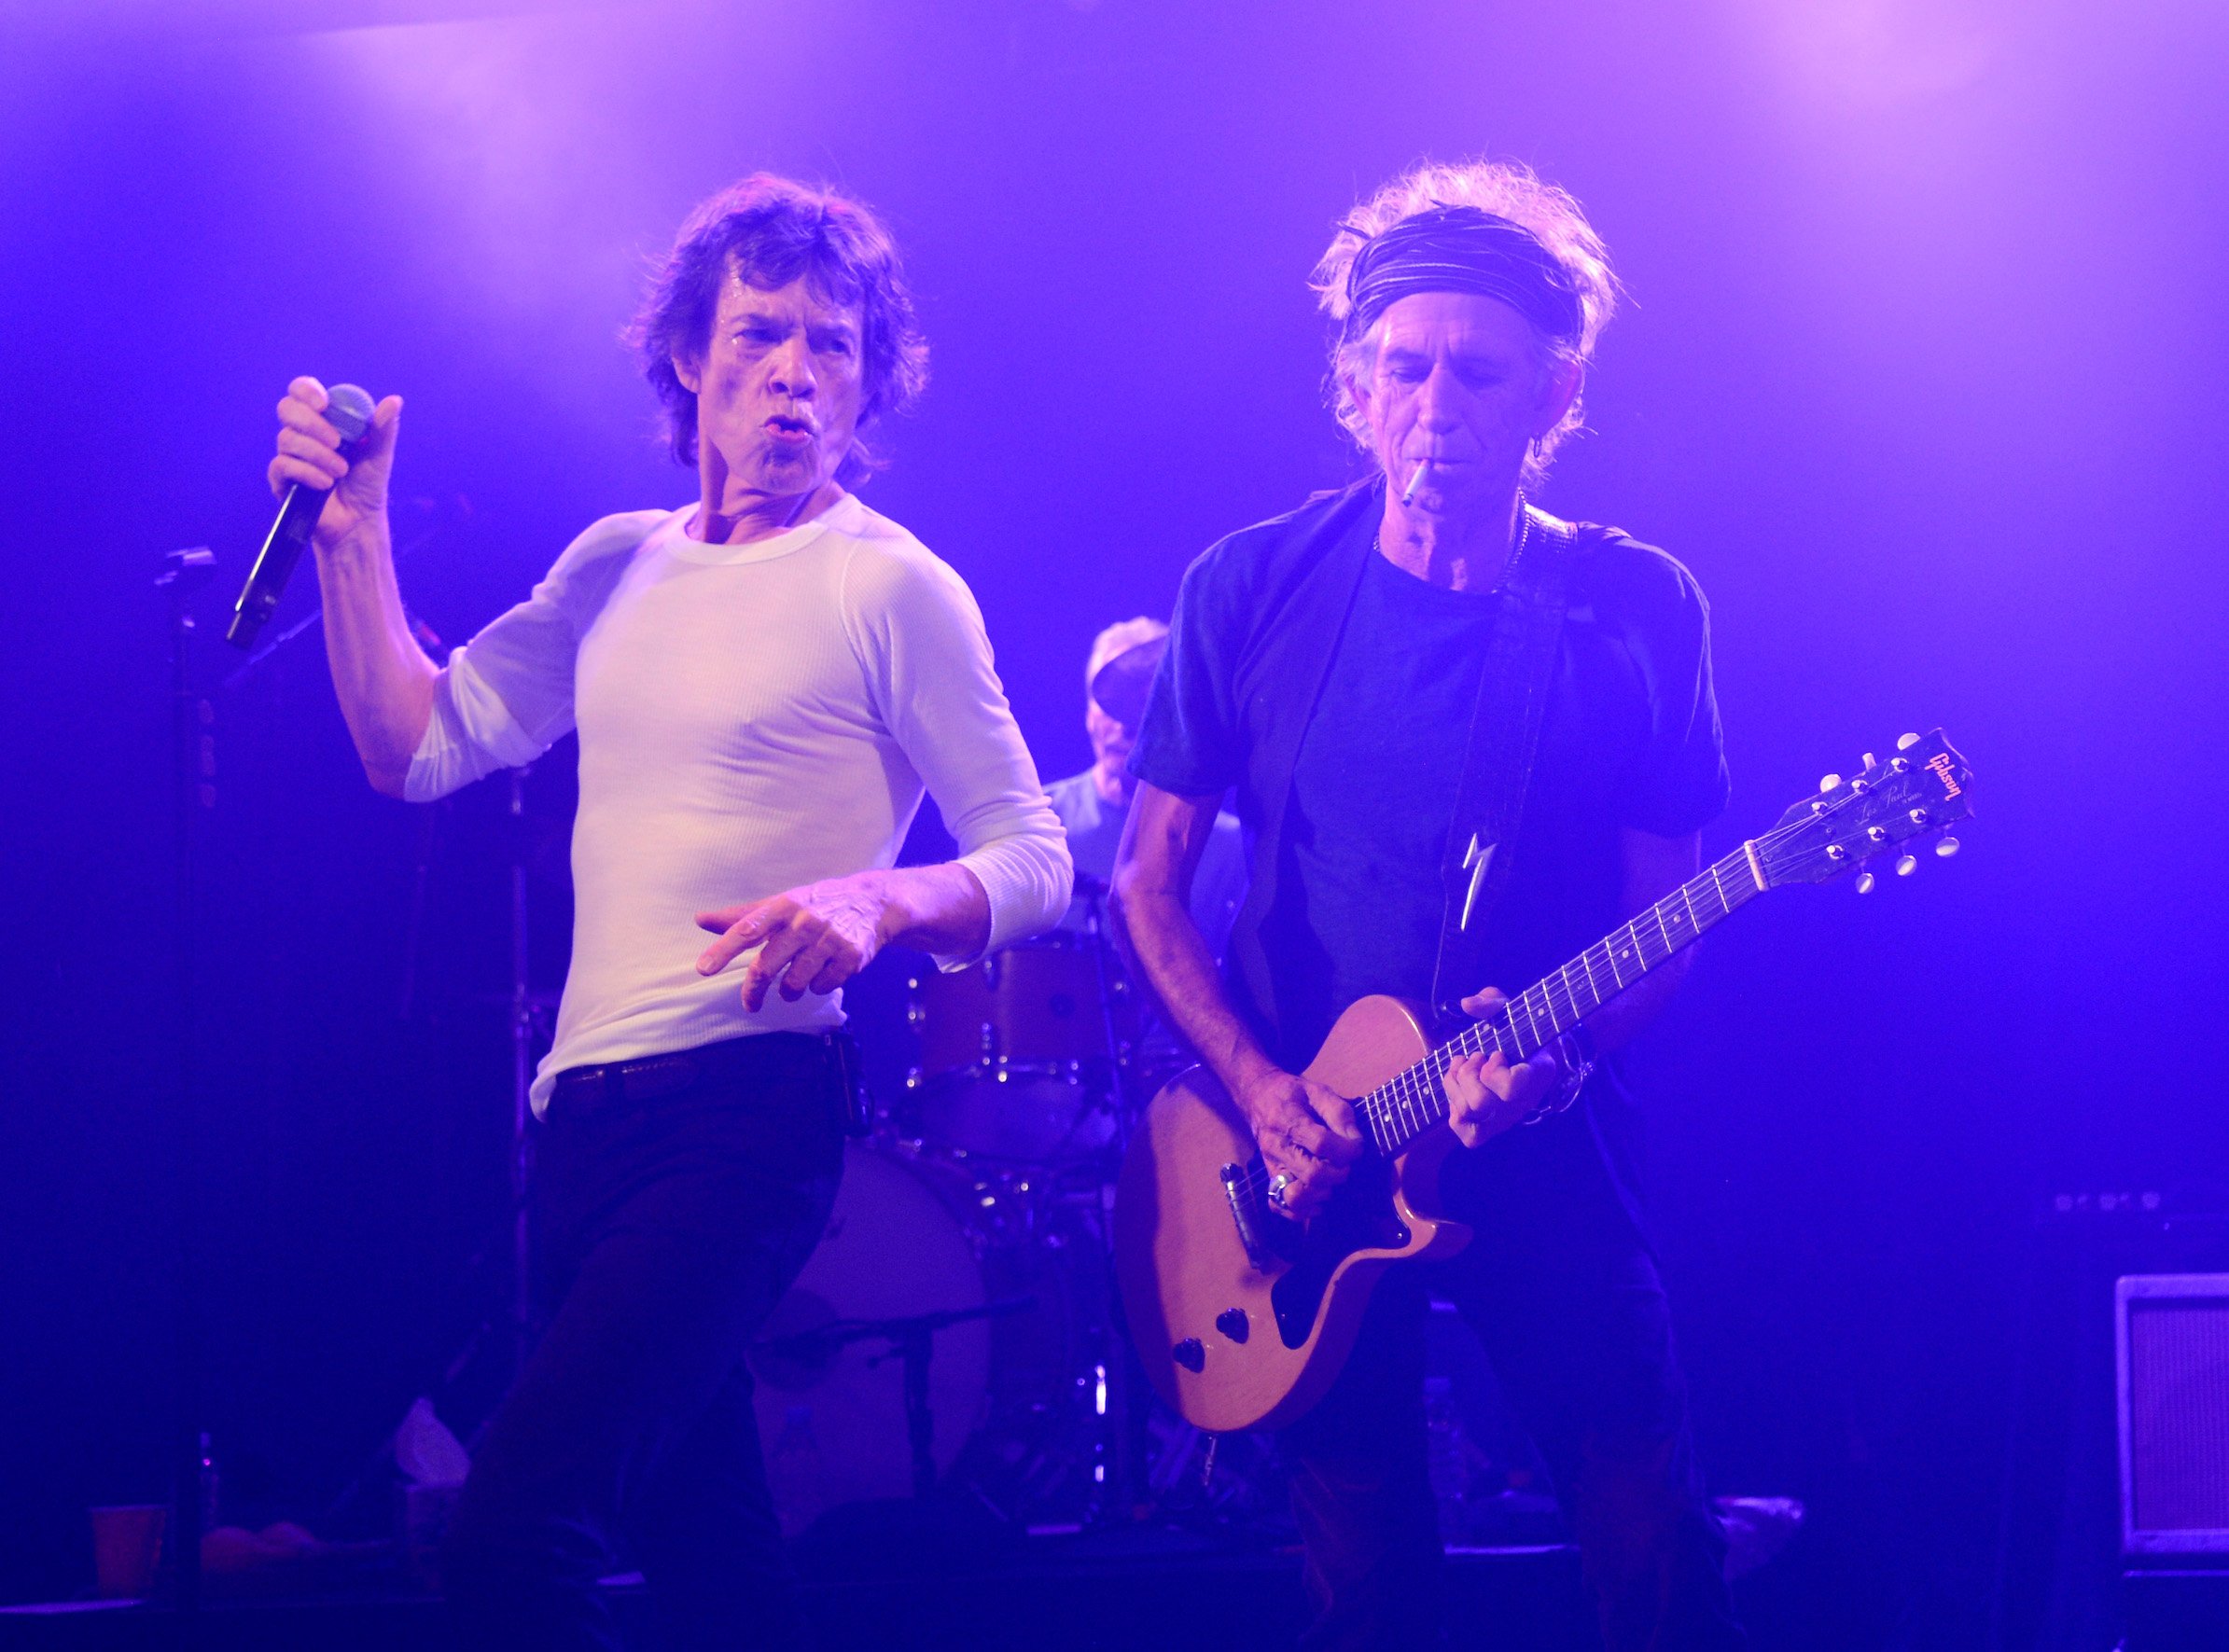 Mick Jagger and Keith Richards of The Rolling Stones perform at Echoplex in Los Angeles, California, in 2013